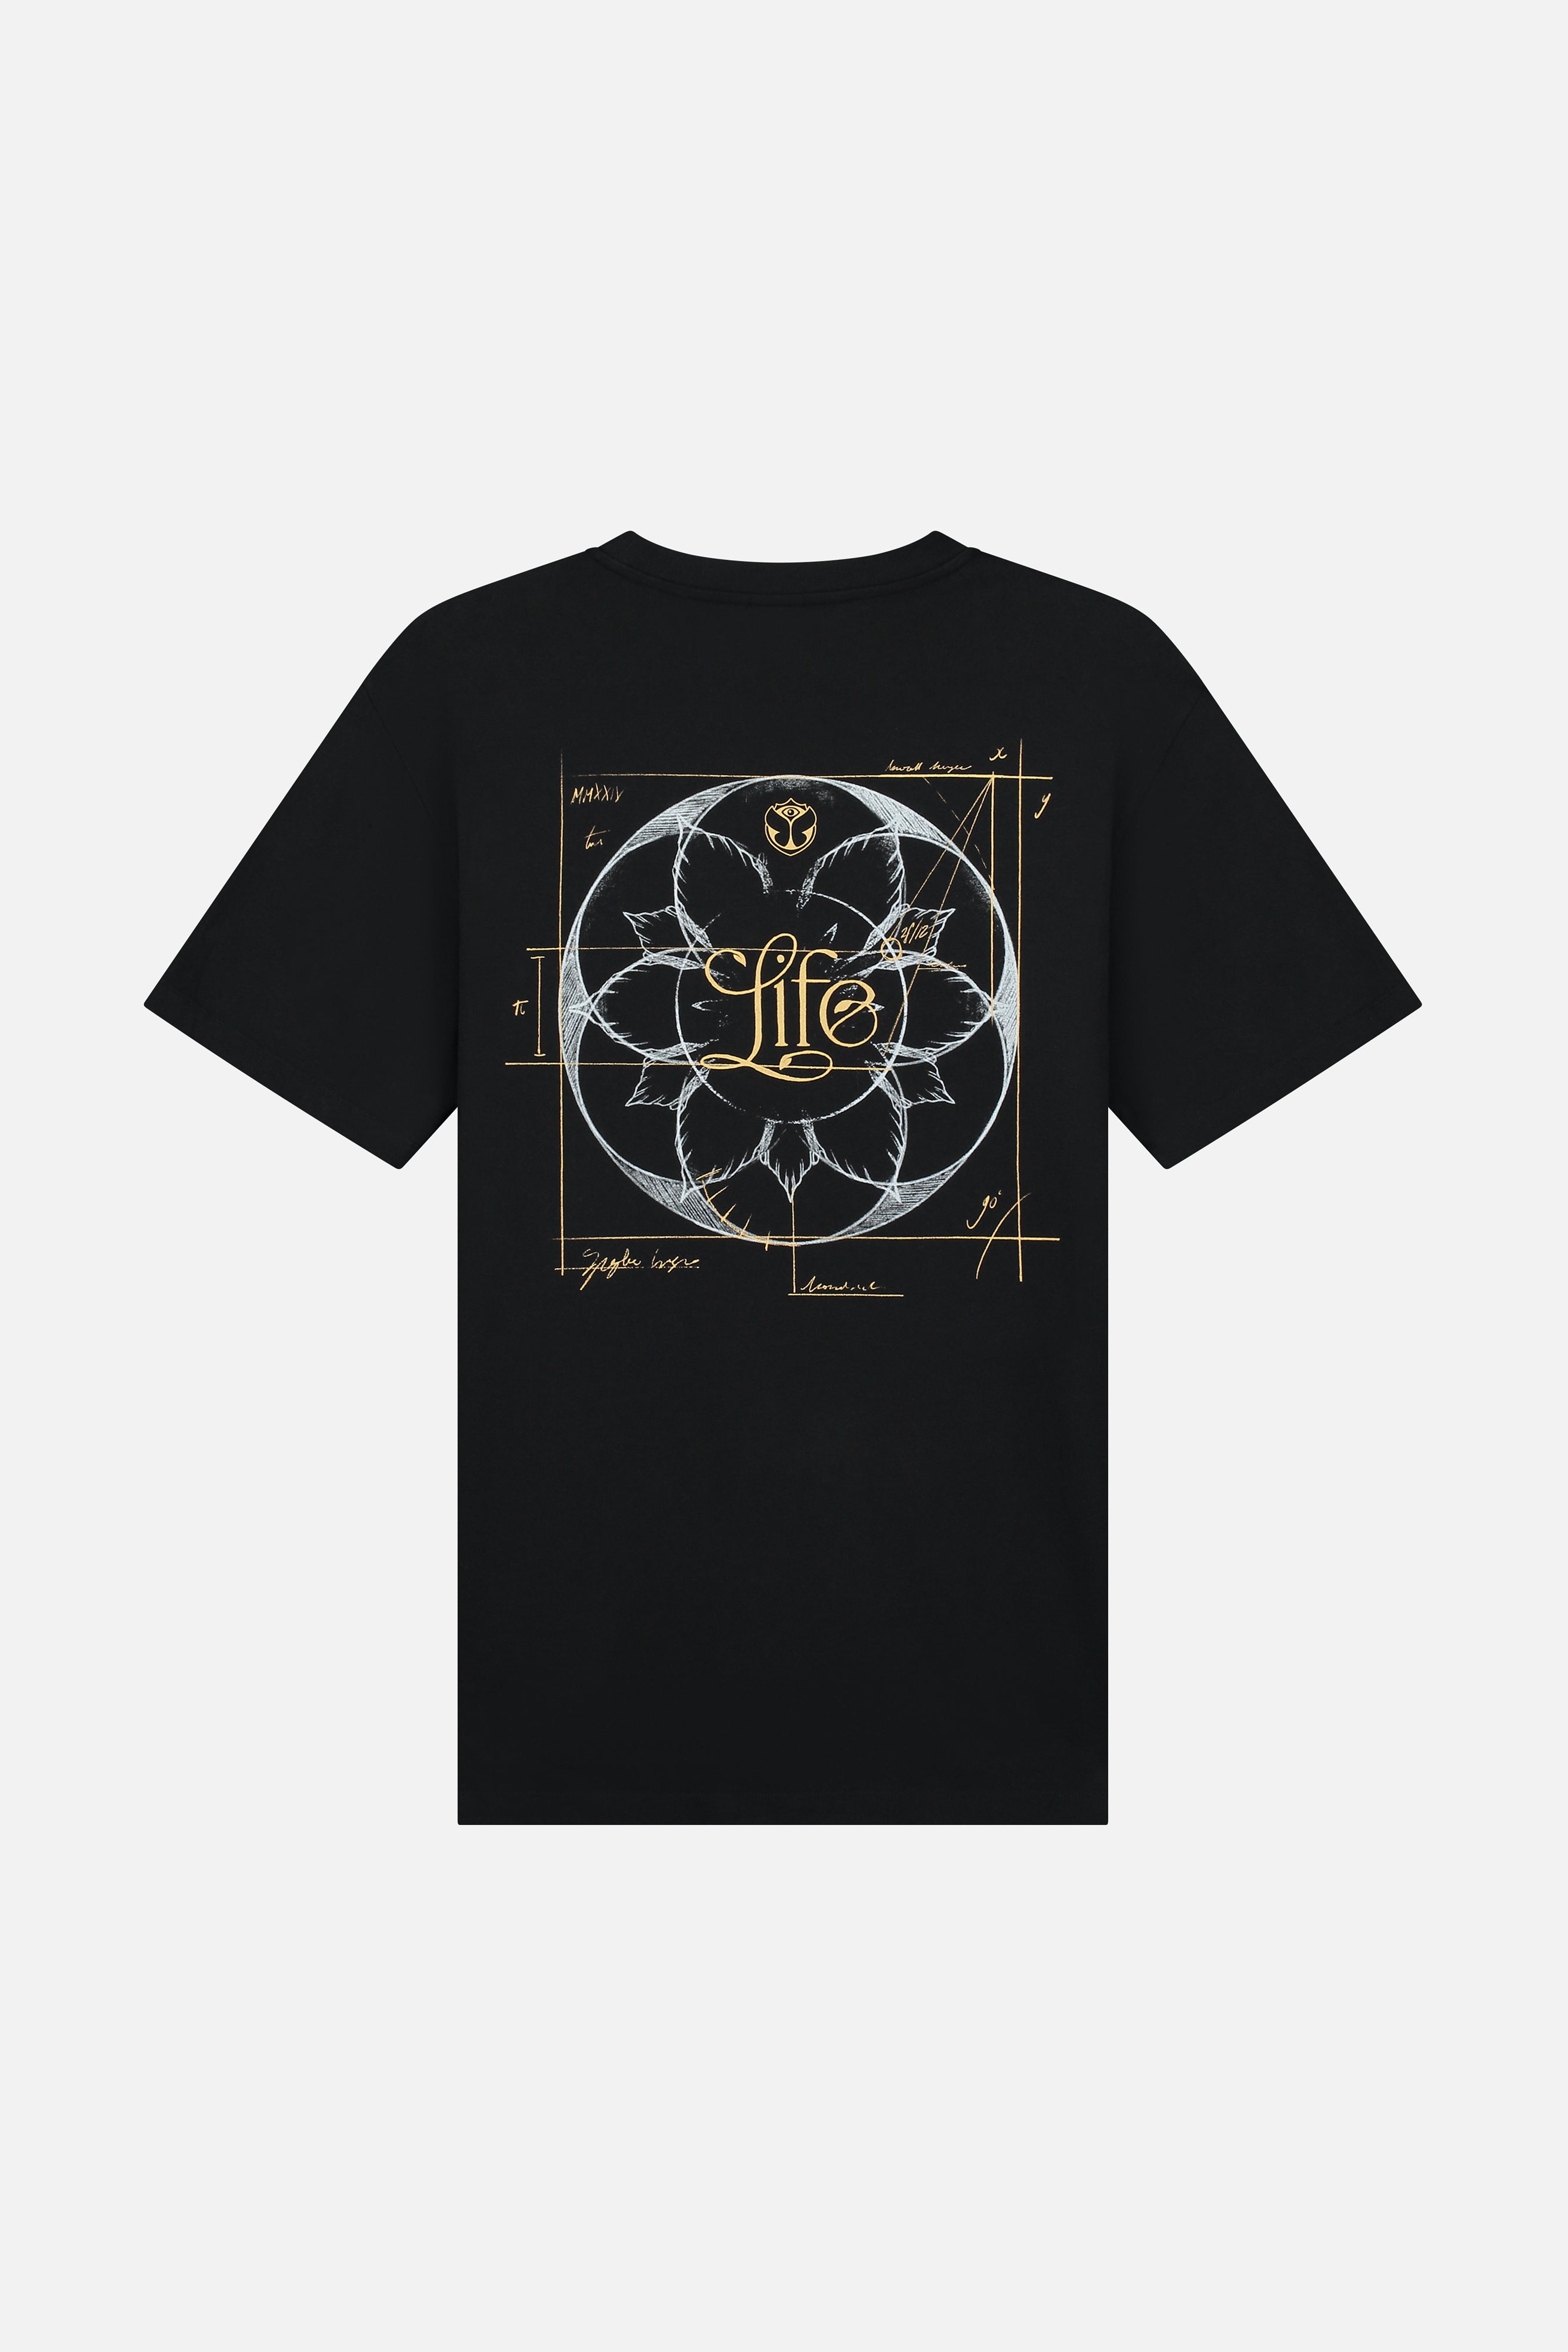 Tomorrowland Store - Official Tomorrowland Apparel & Accessories